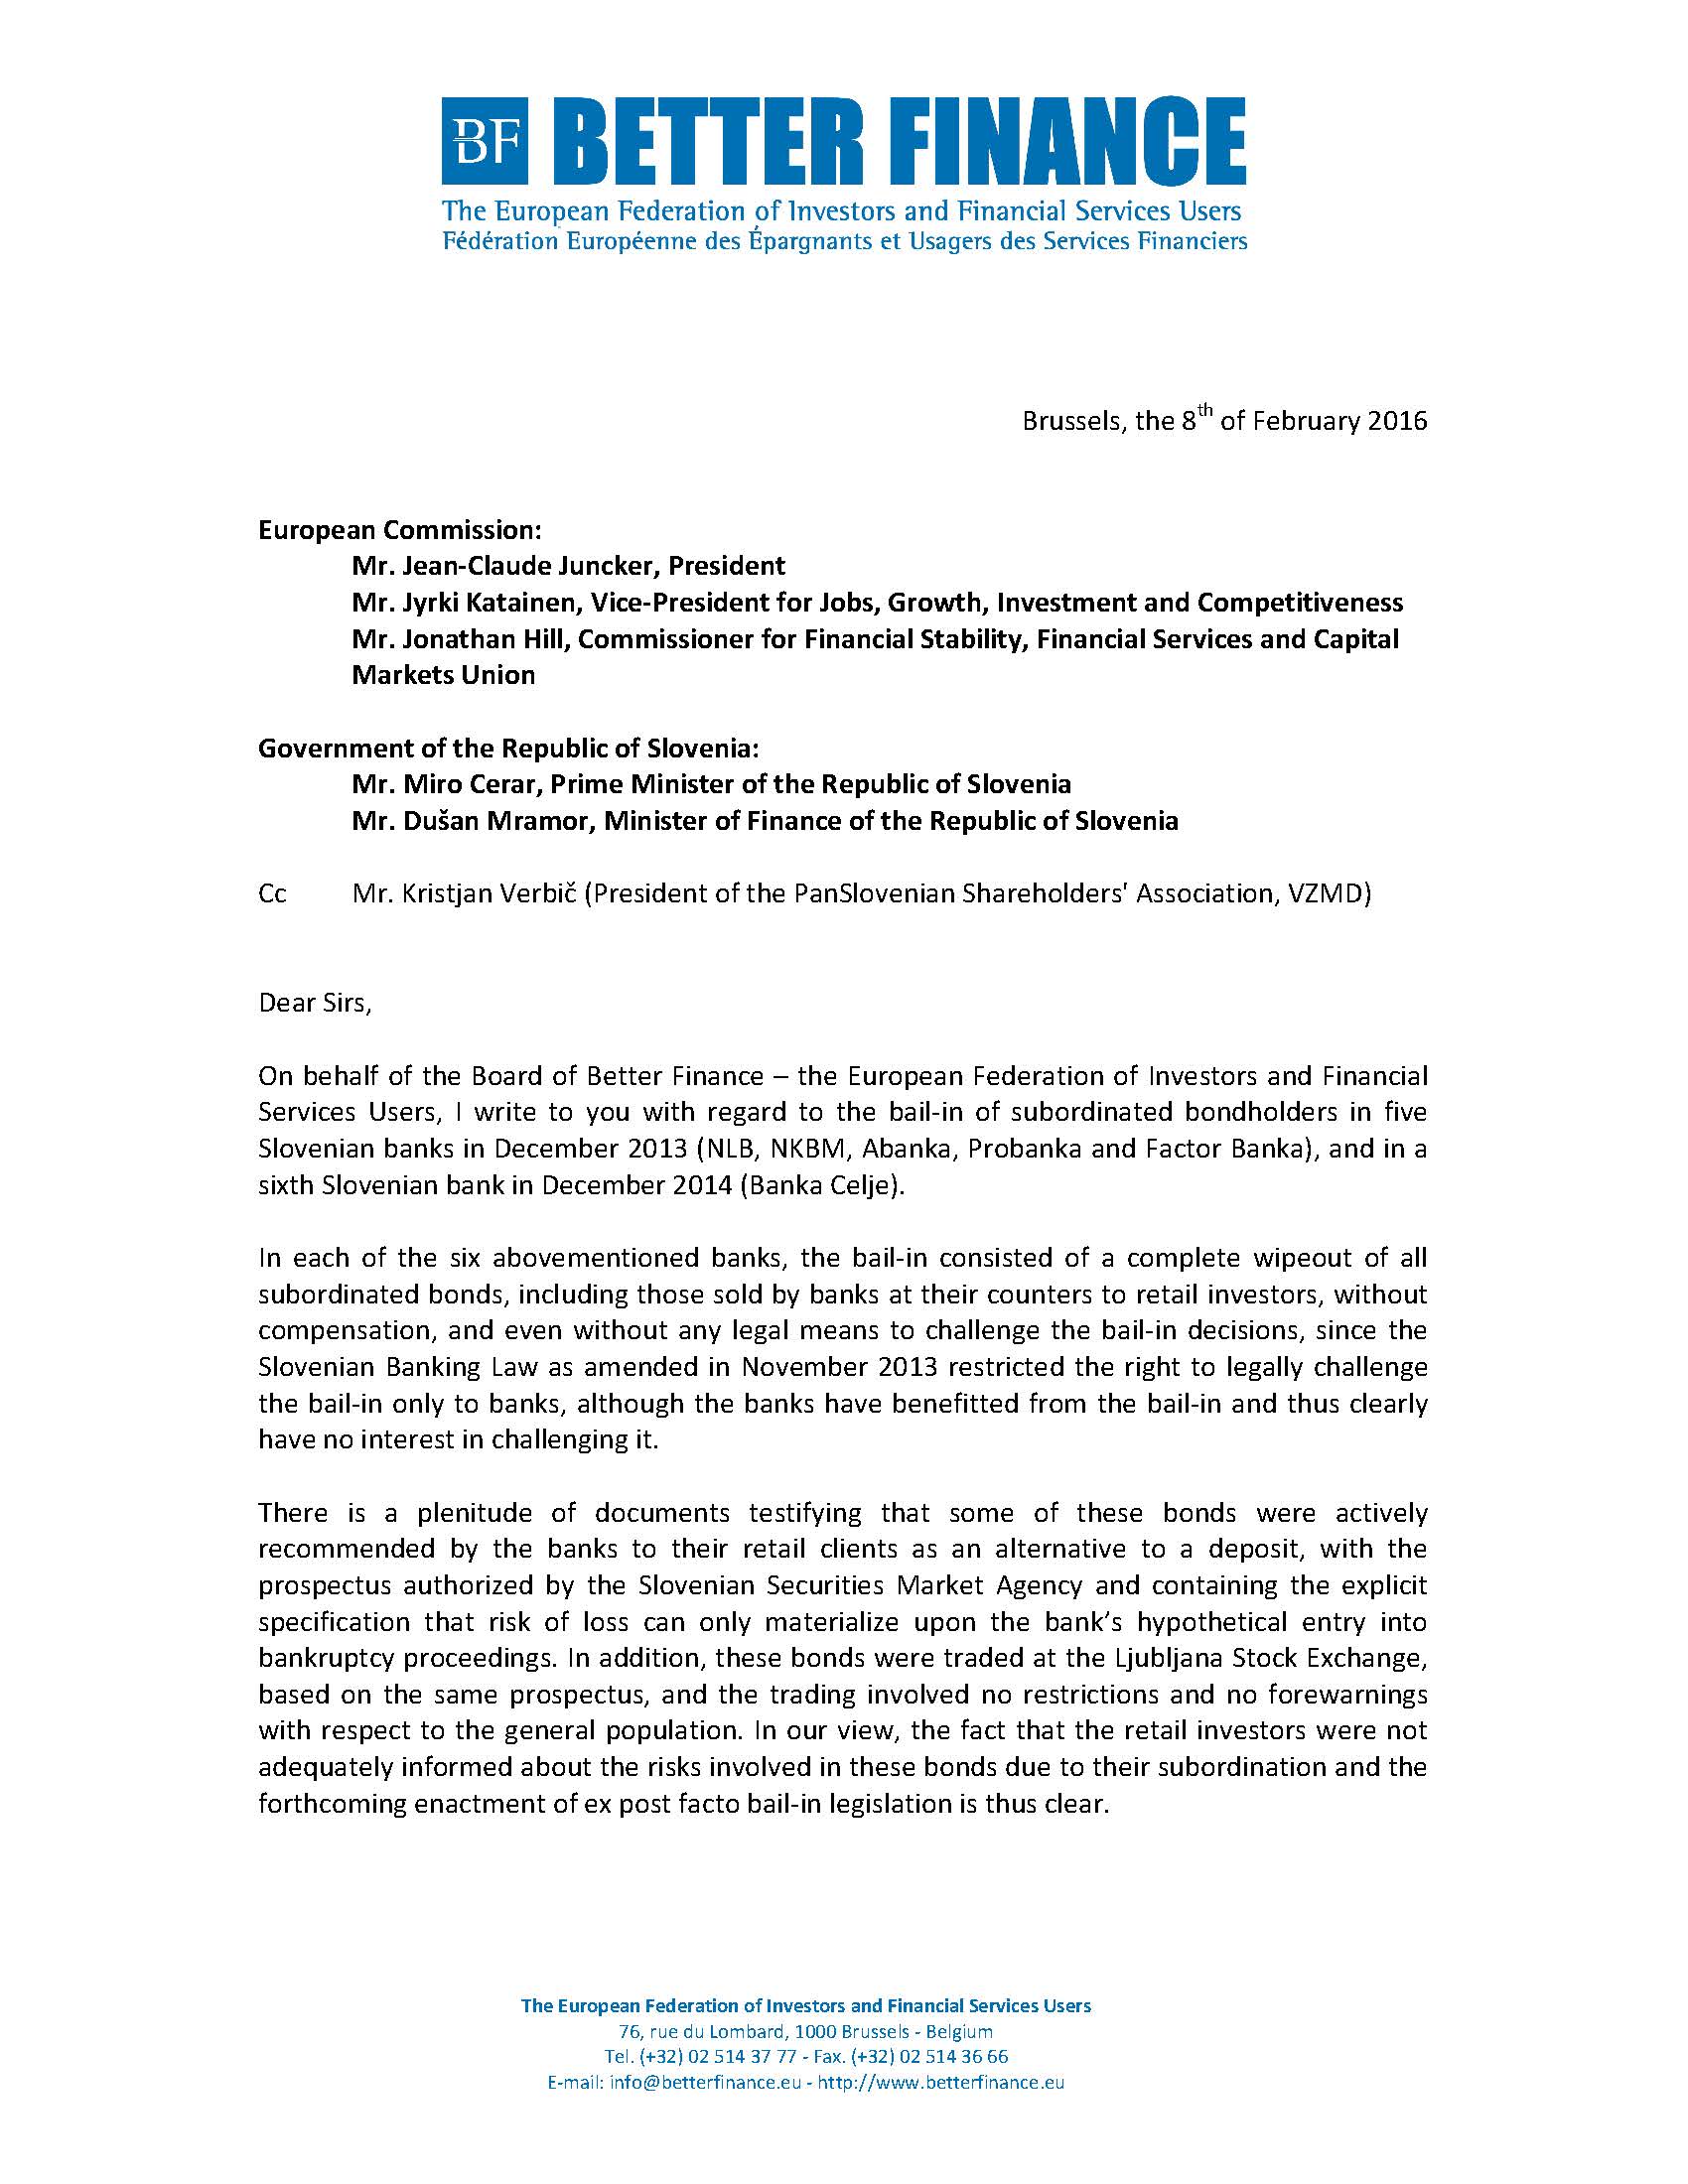 Better_Finance_letter_to_EC_and_Government_of_Slovenia_re